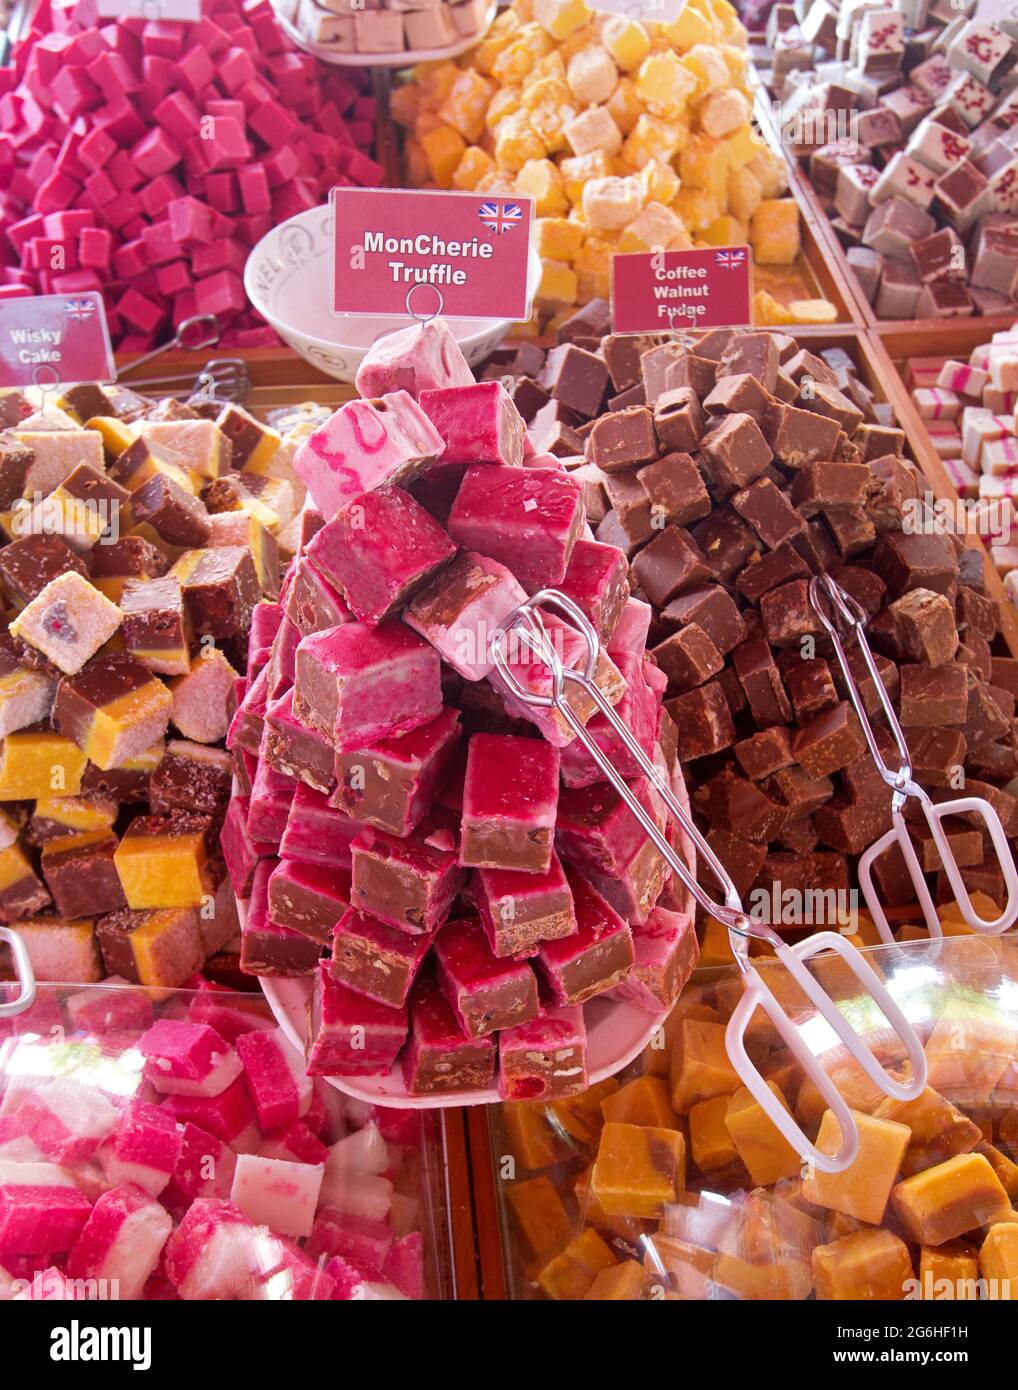 Mon cheri chocolate box Cut Out Stock Images & Pictures - Alamy